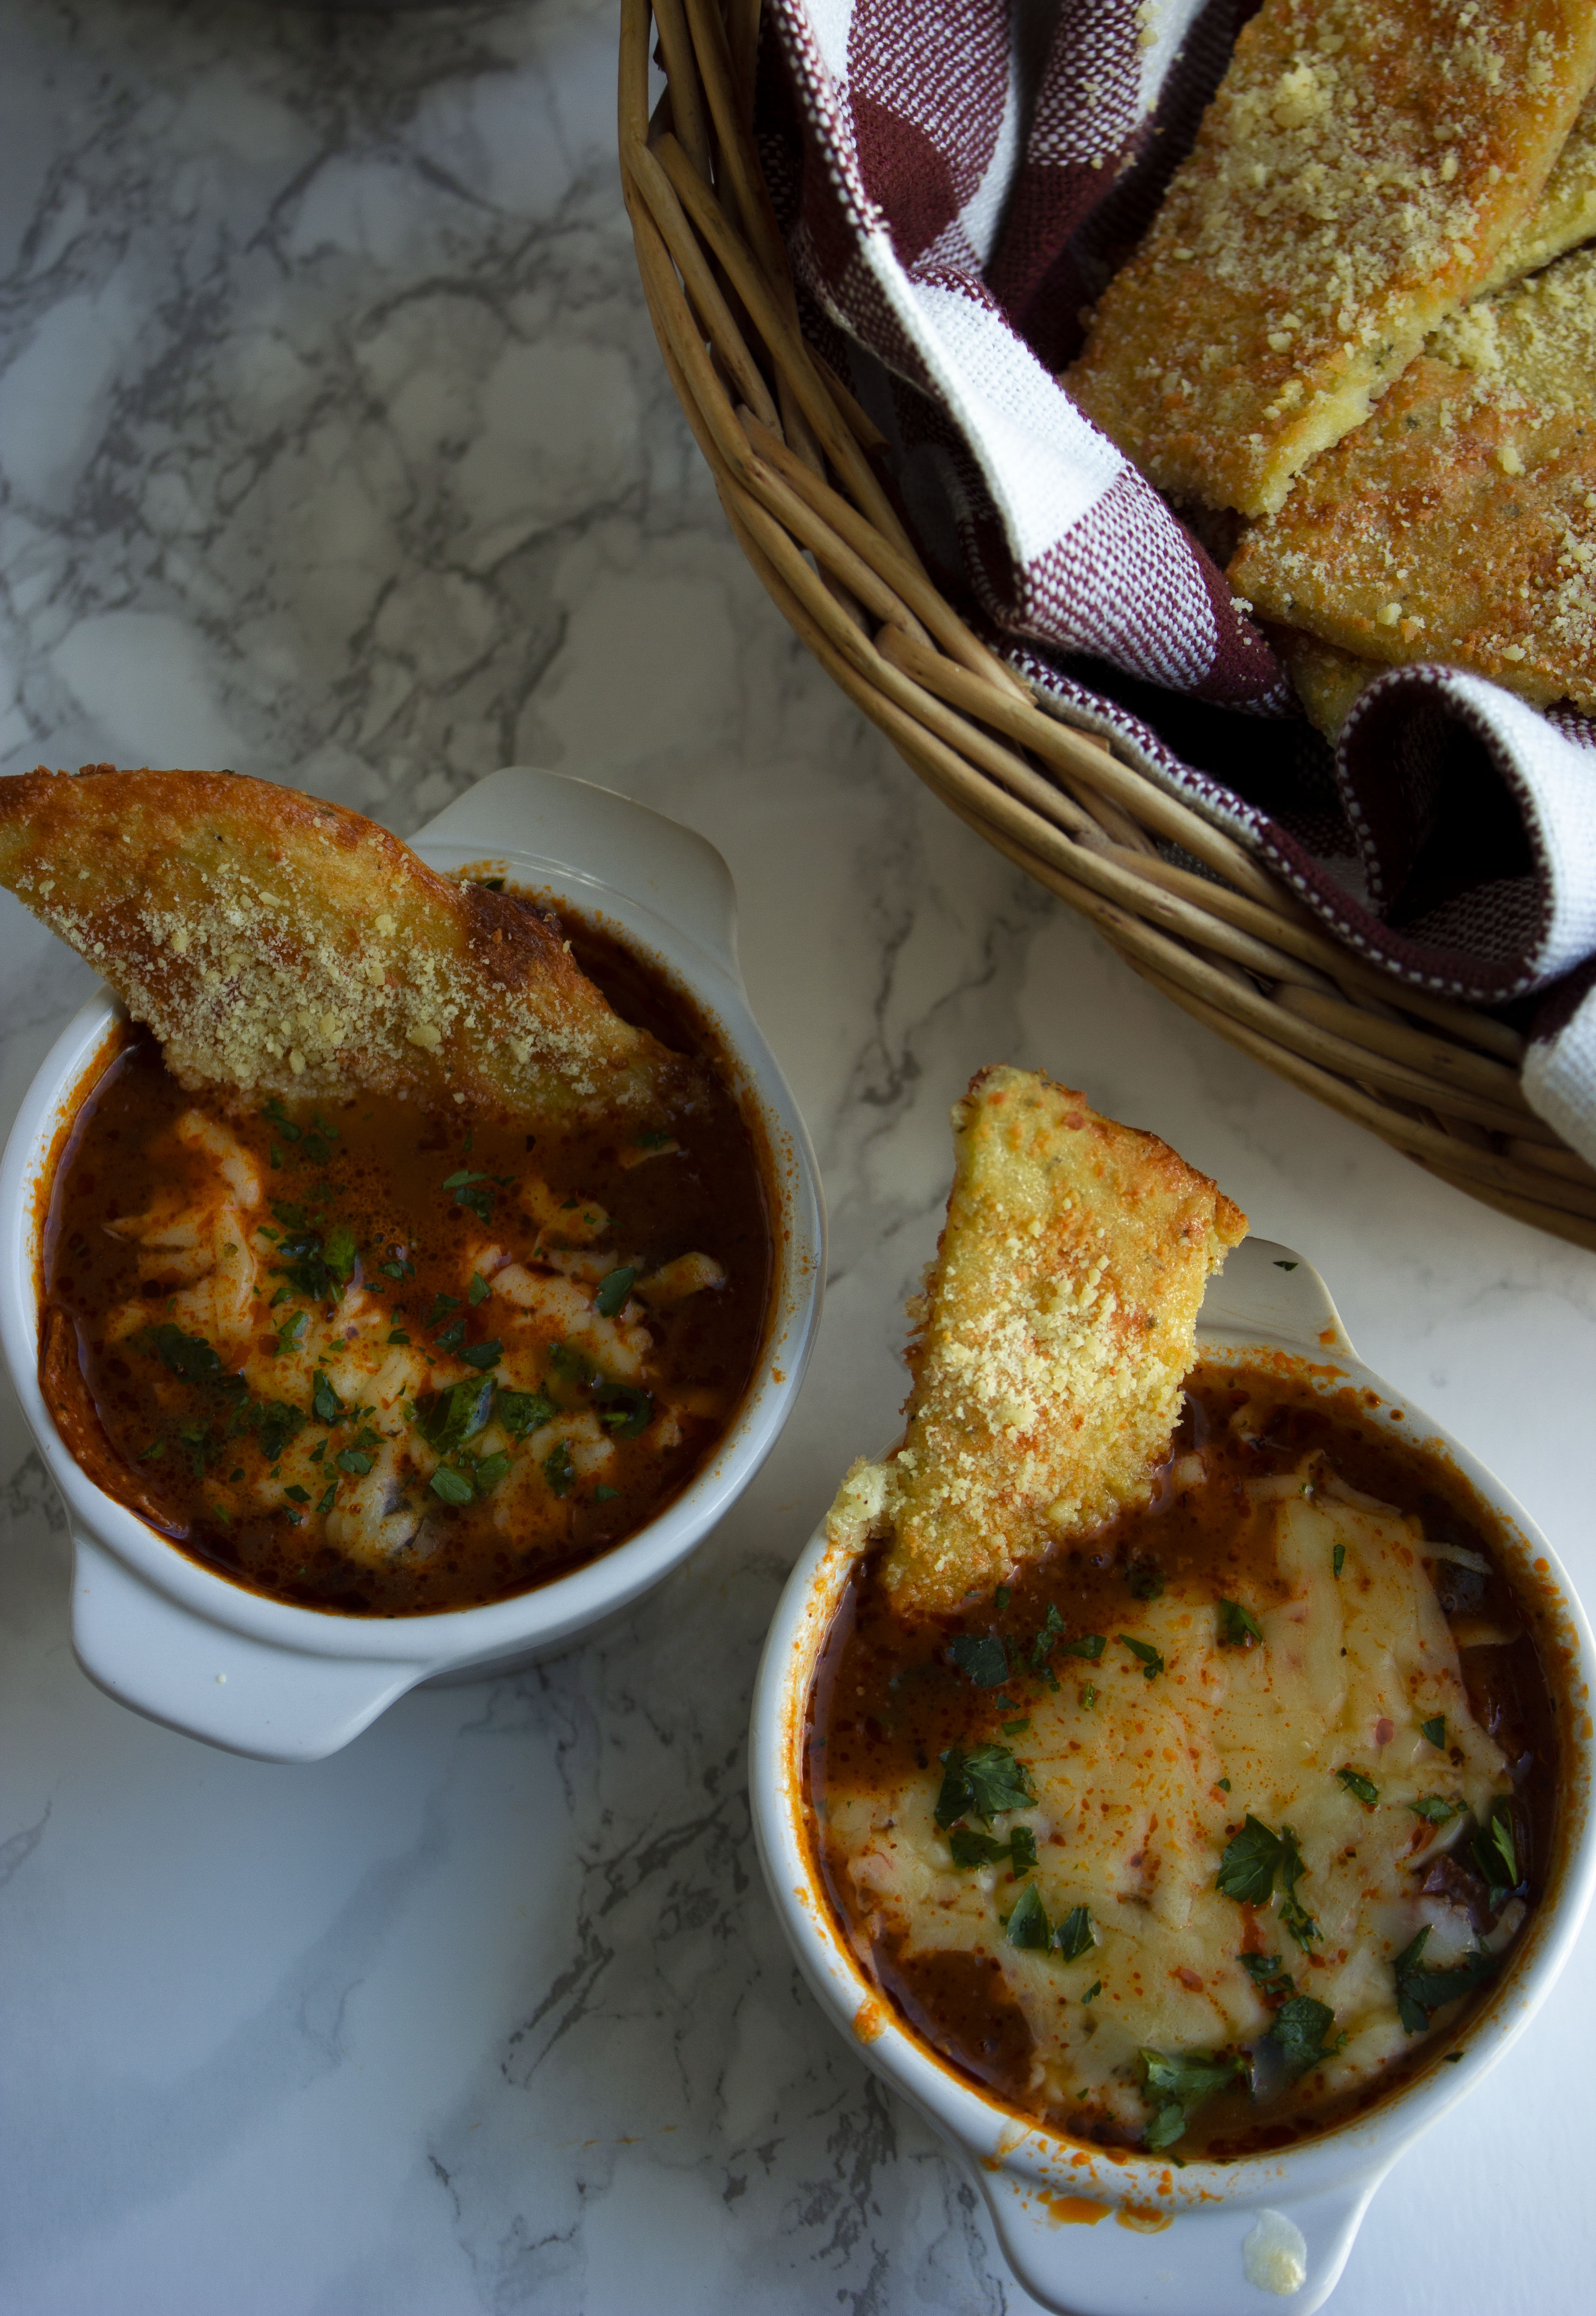 This low carb pizza soup is everything you need for a keto pizza night! This low calorie and lower fat soup is delicious on its own or with keto garlic bread! A bonus recipe is include for keto garlic bread!